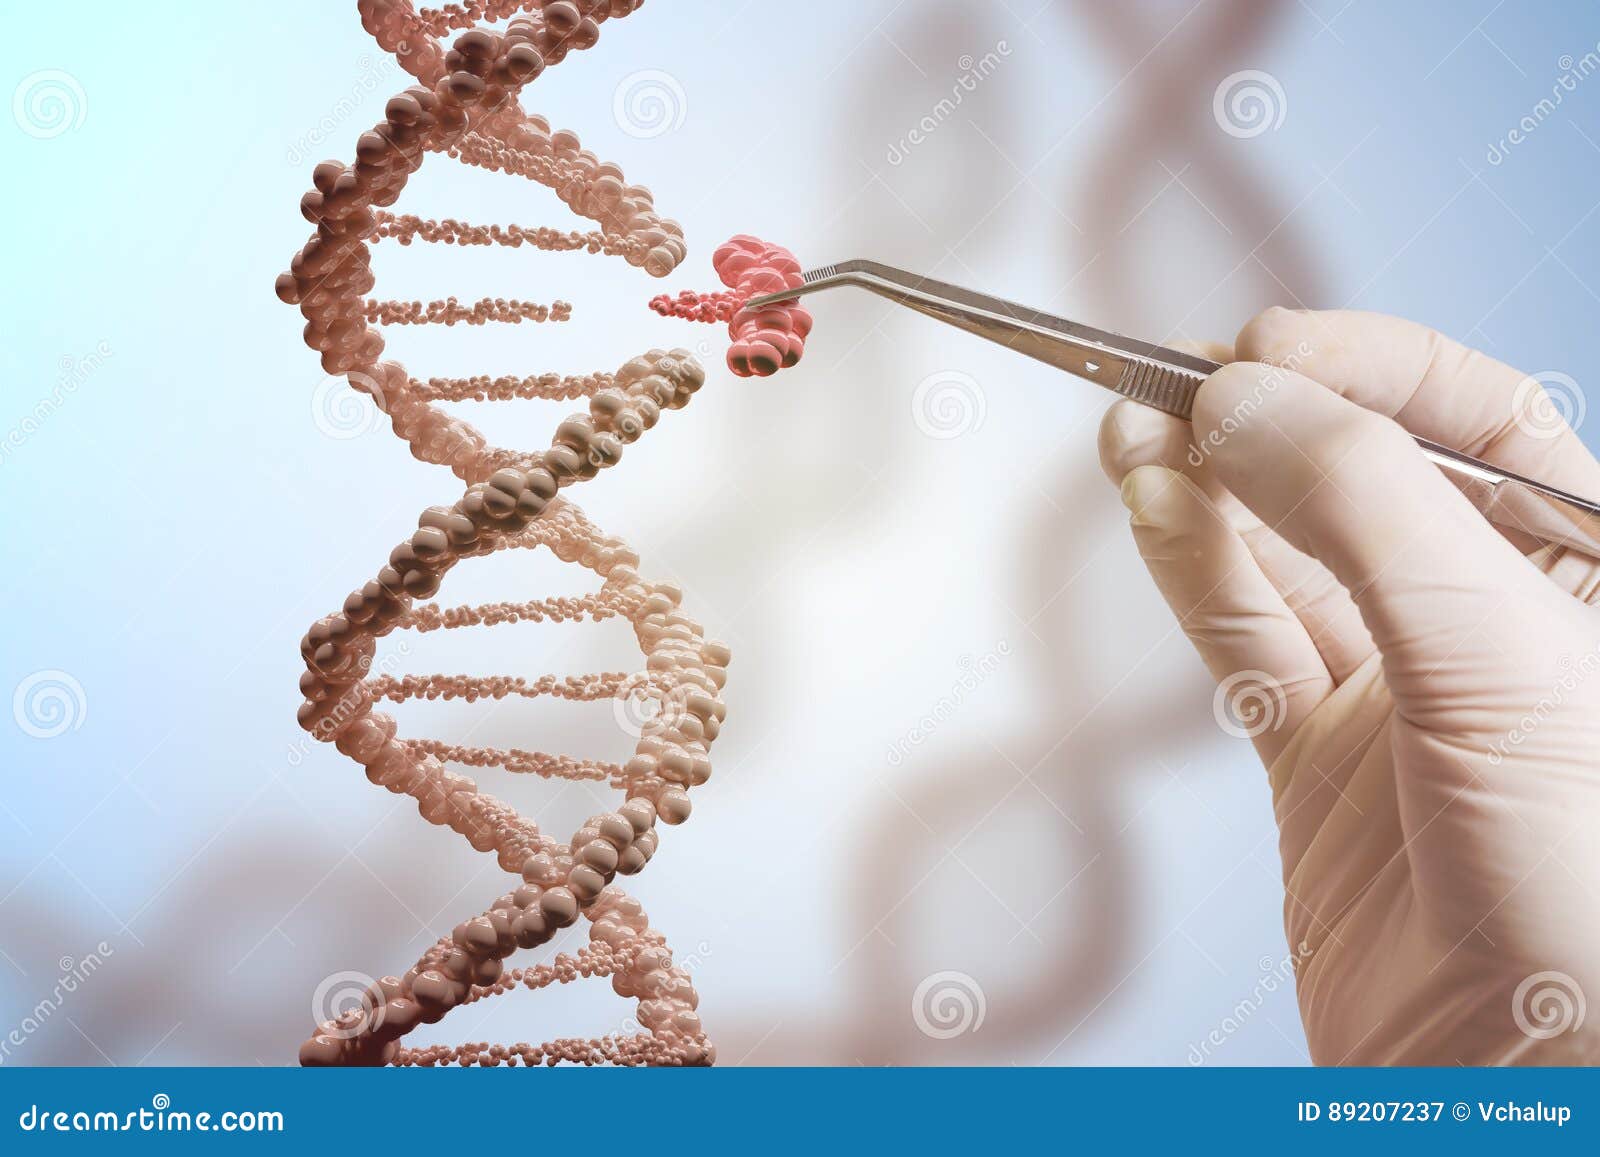 genetic engineering and gene manipulation concept. hand is replacing part of a dna molecule